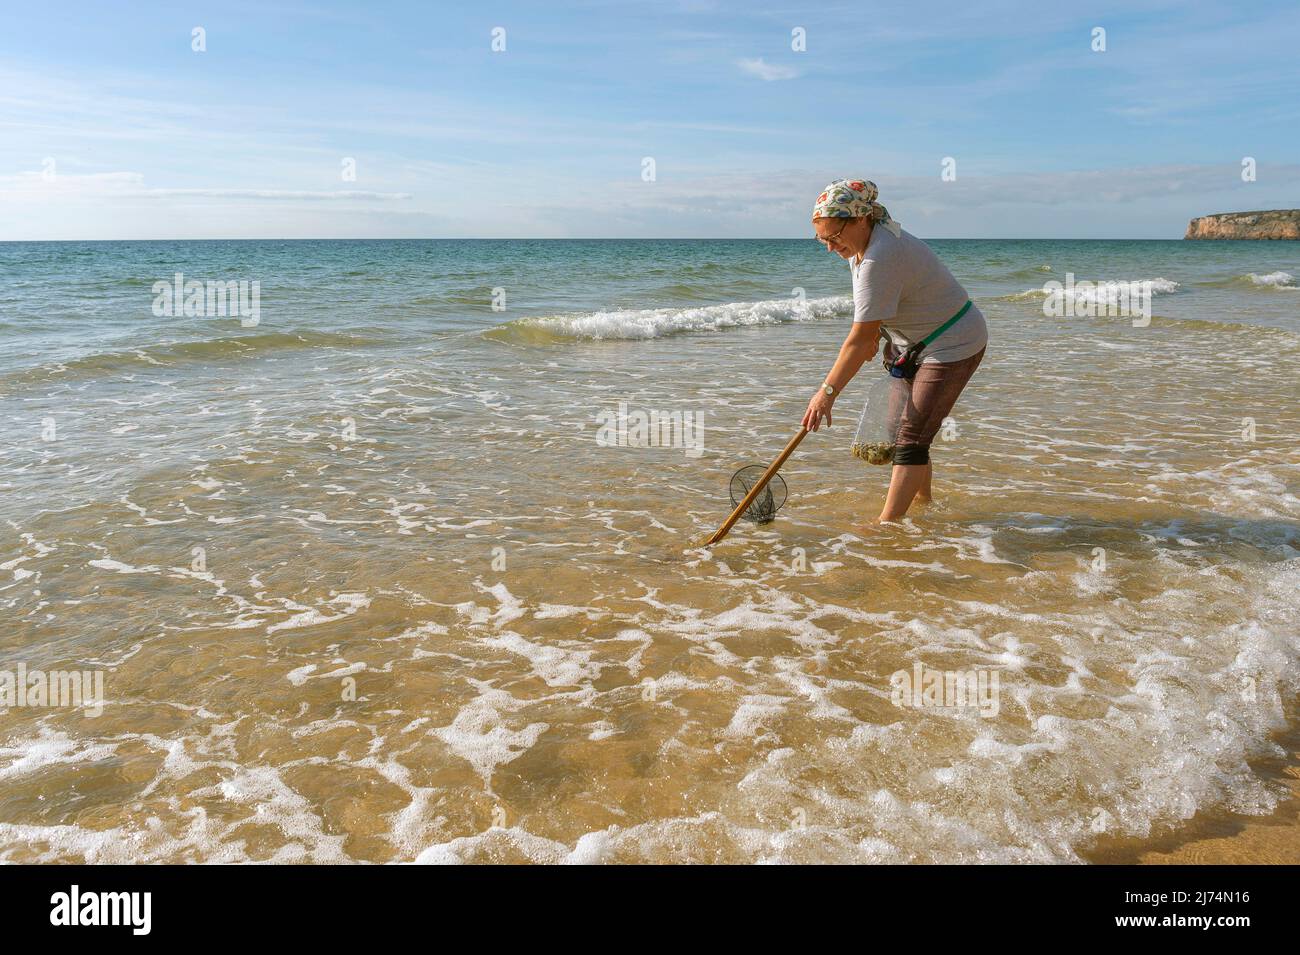 Woman fishing worms, crabs and other crustaceans, Portugal, Algarve Stock Photo